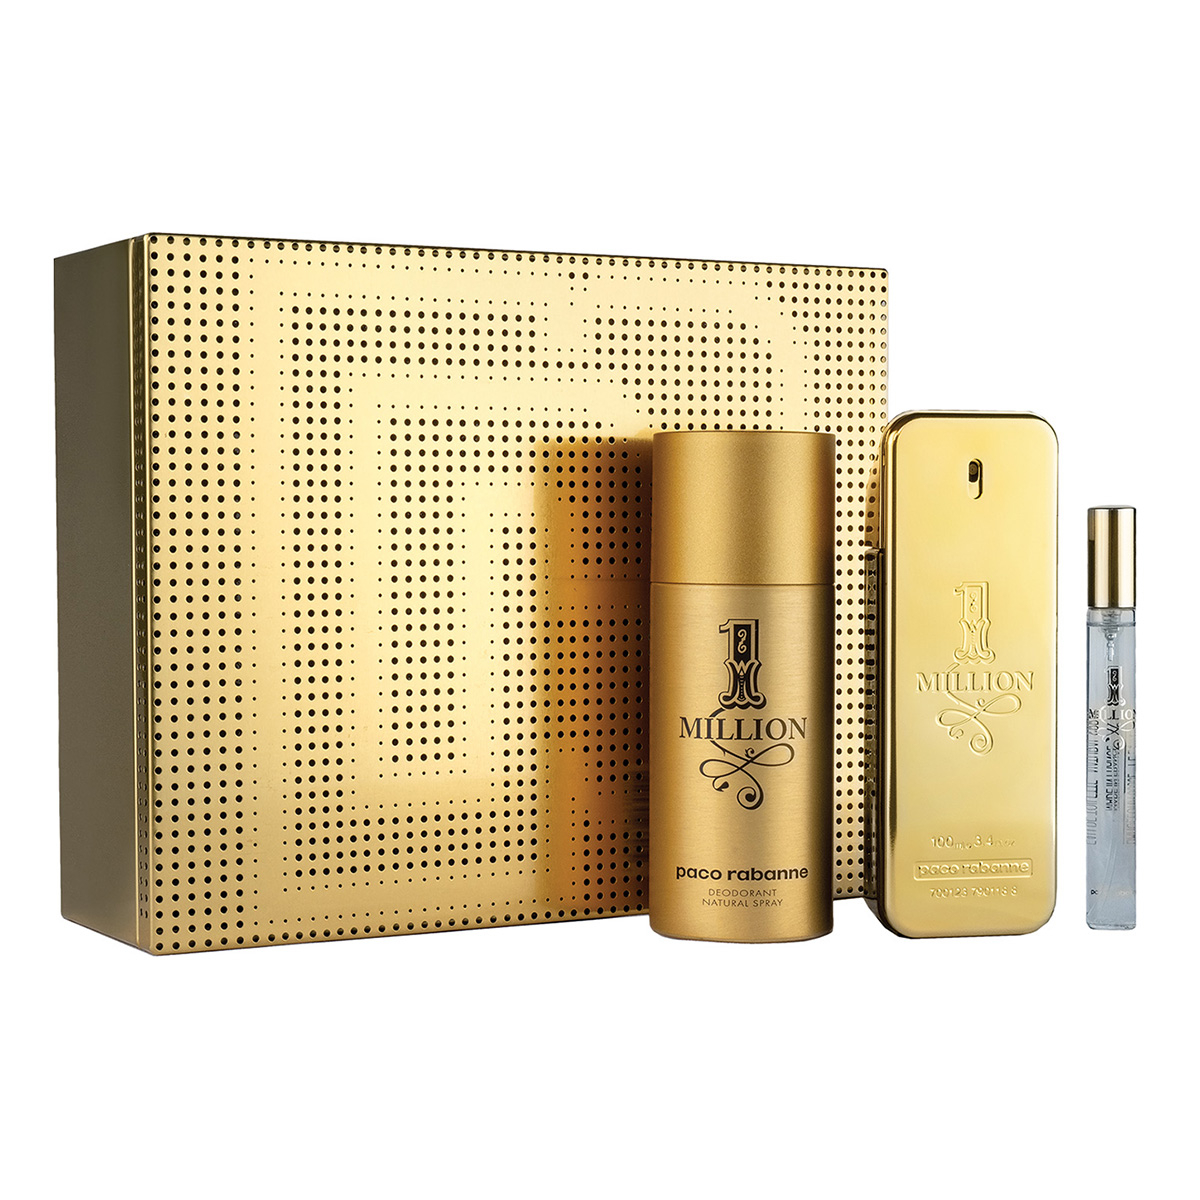 paco rabanne one million gift sets